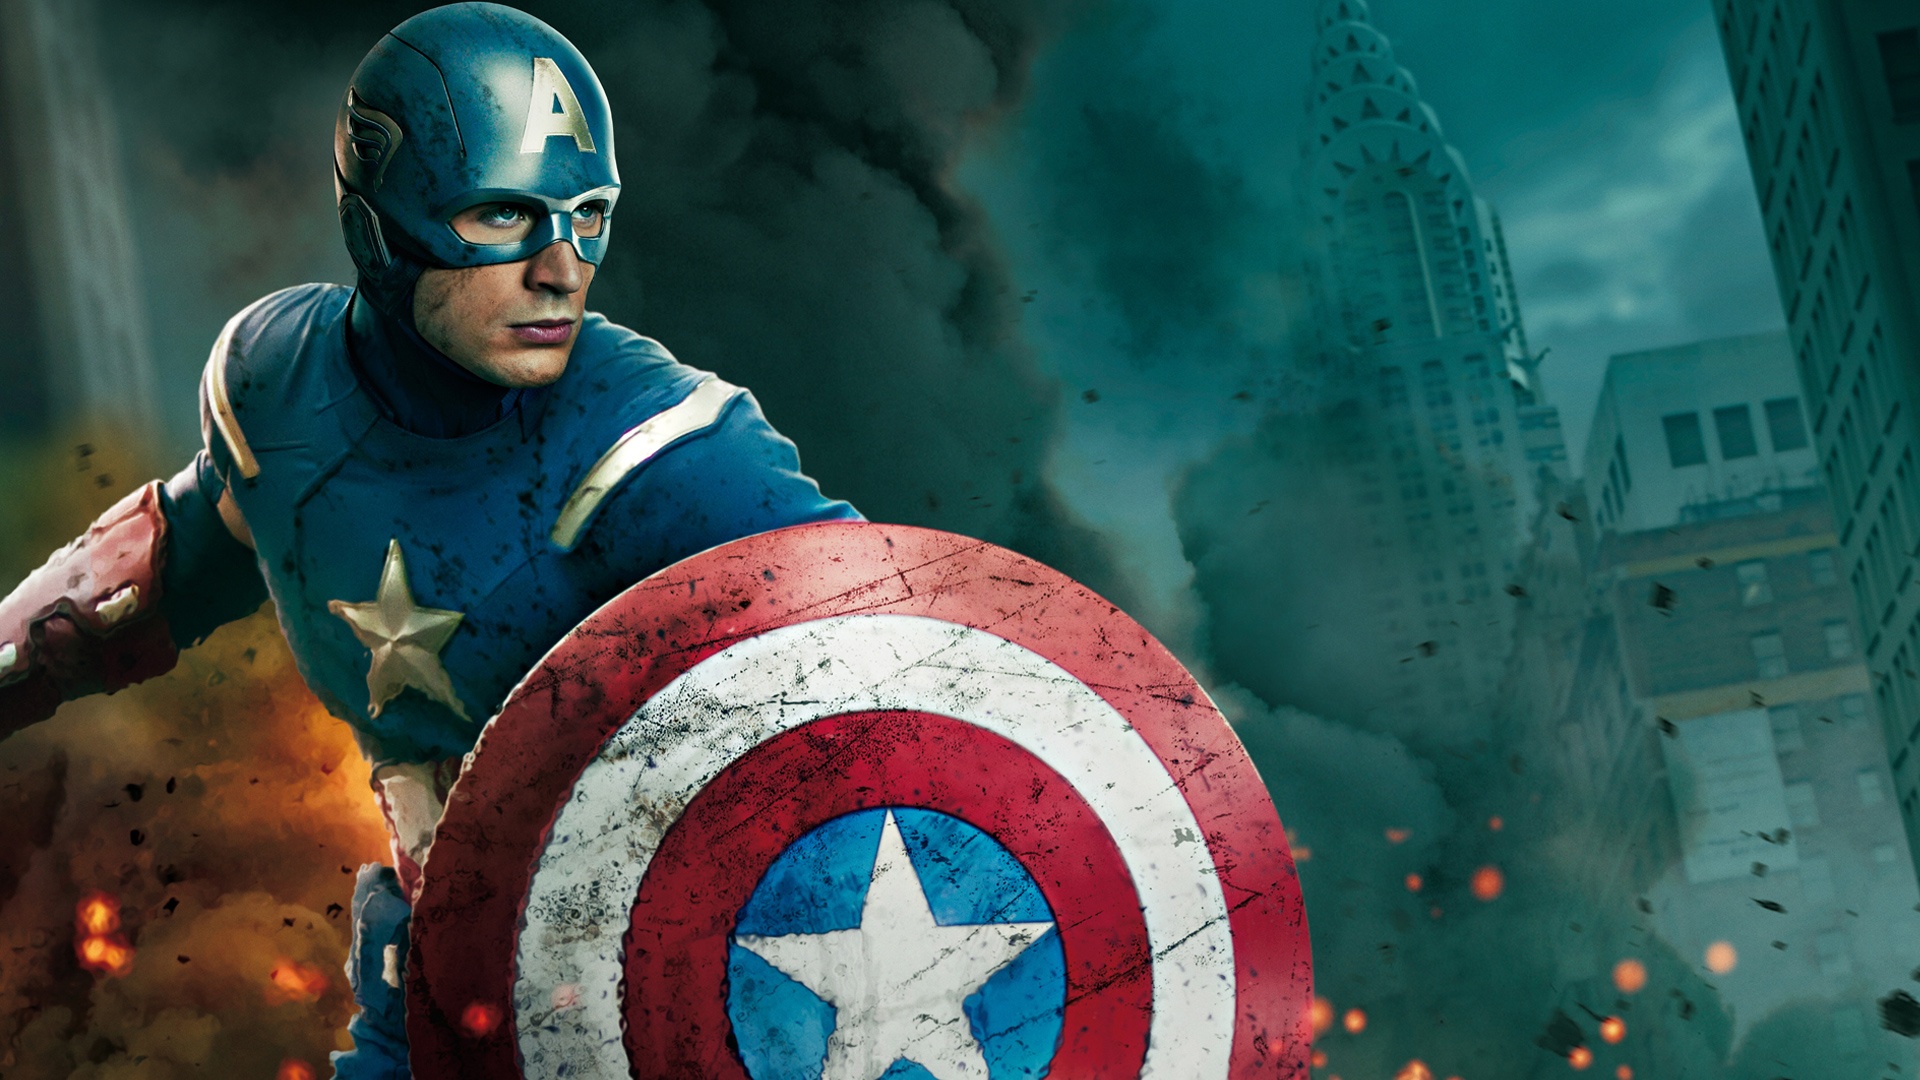 The Avengers Captain America Wallpapers HD Wallpapers 1920x1080